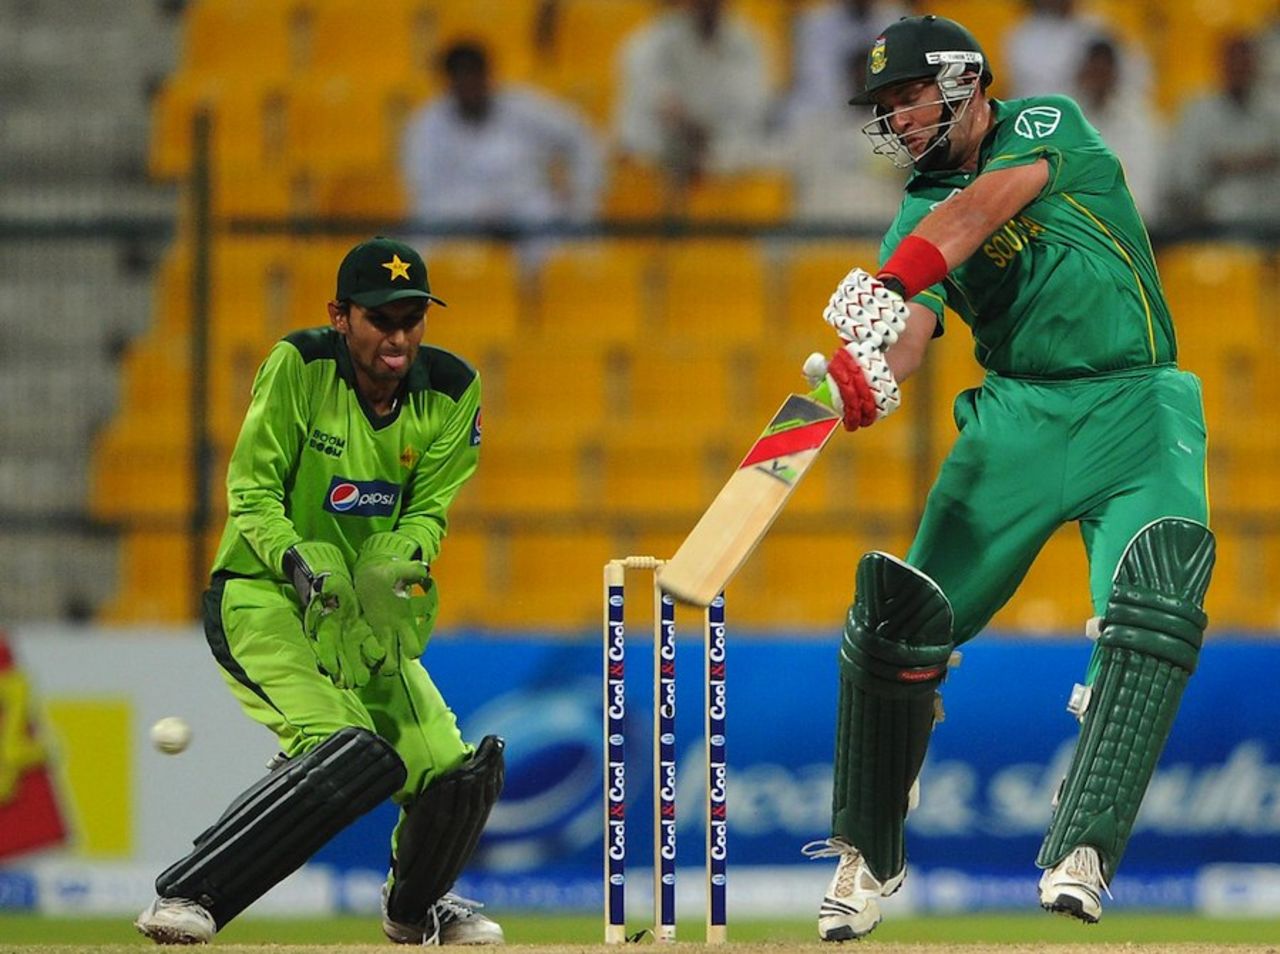 Jacques Kallis attempts to play off the back foot, Pakistan v South Africa, 1st ODI, Abu Dhabi, October 29, 2010